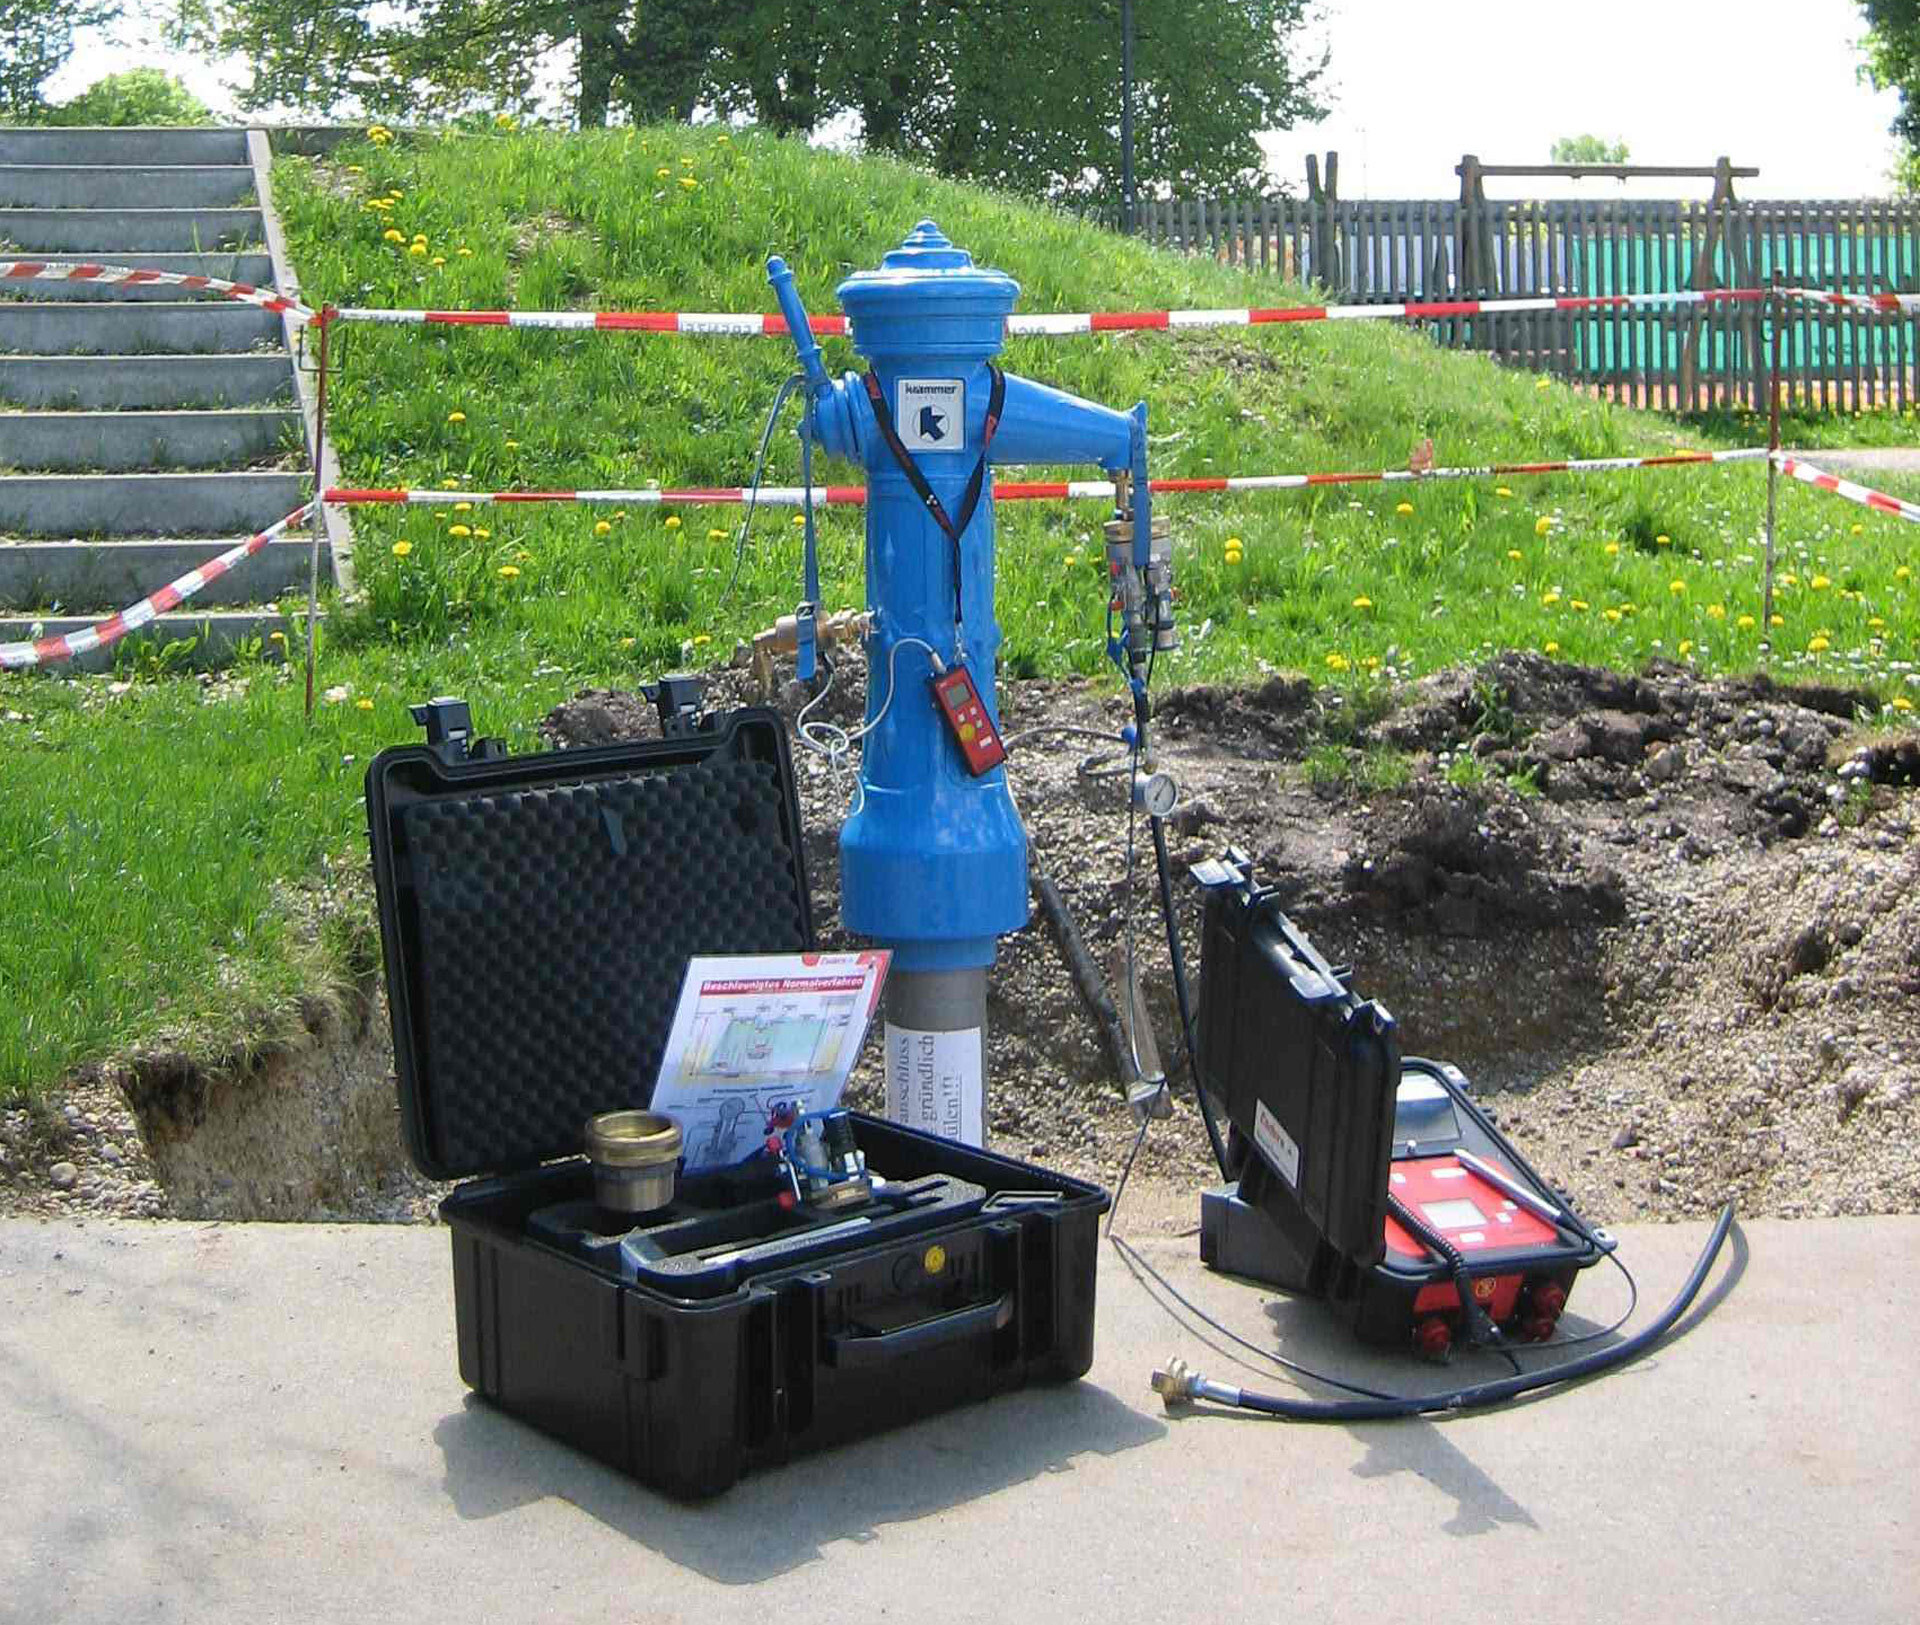 Digital water flowmeter in the field connected to hydrant